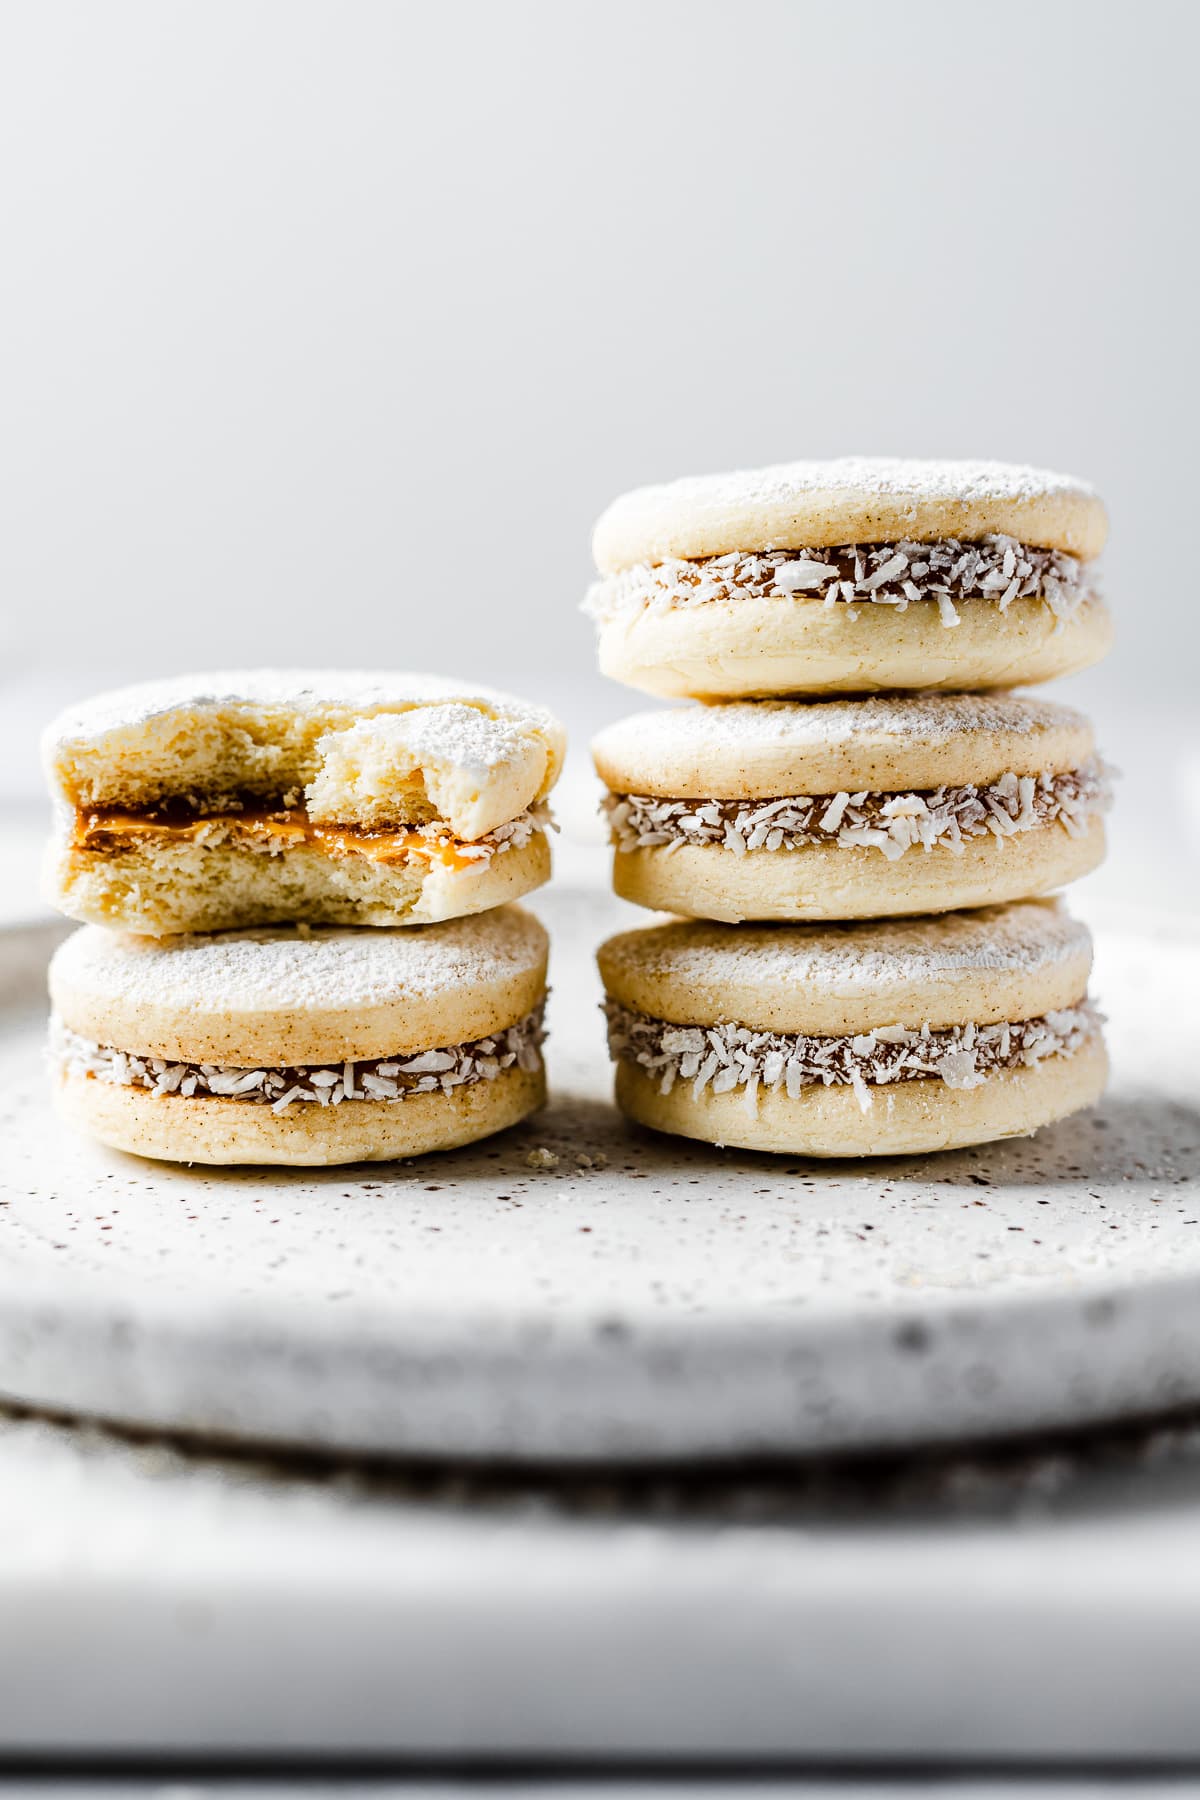 Two stacks of Argentine alfajores de maicena. The stack on the left has two cookies. The top one has a bite taken out of it.